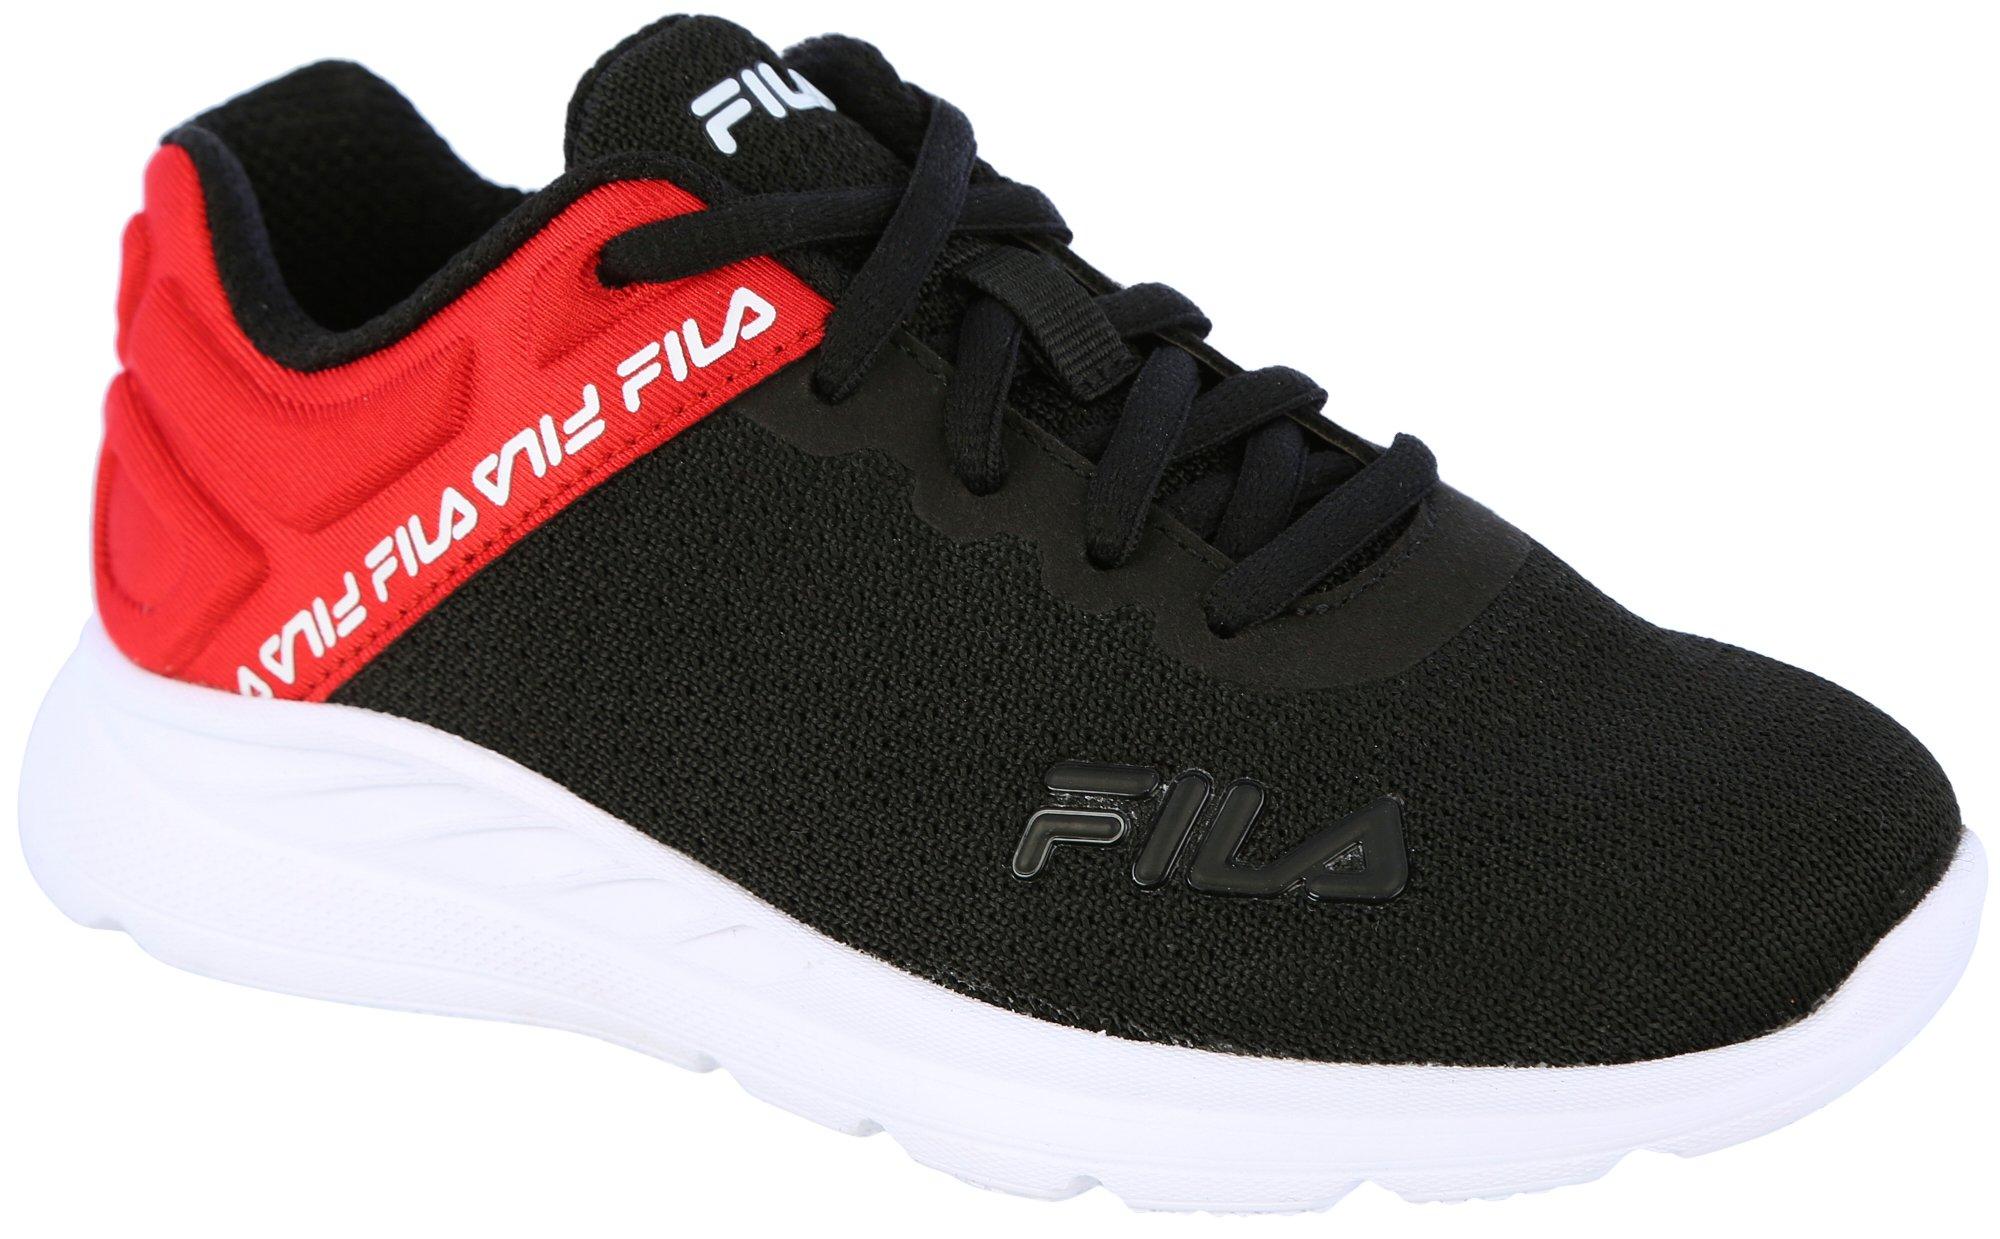 Fila Boys Lightspin Athletic Shoes